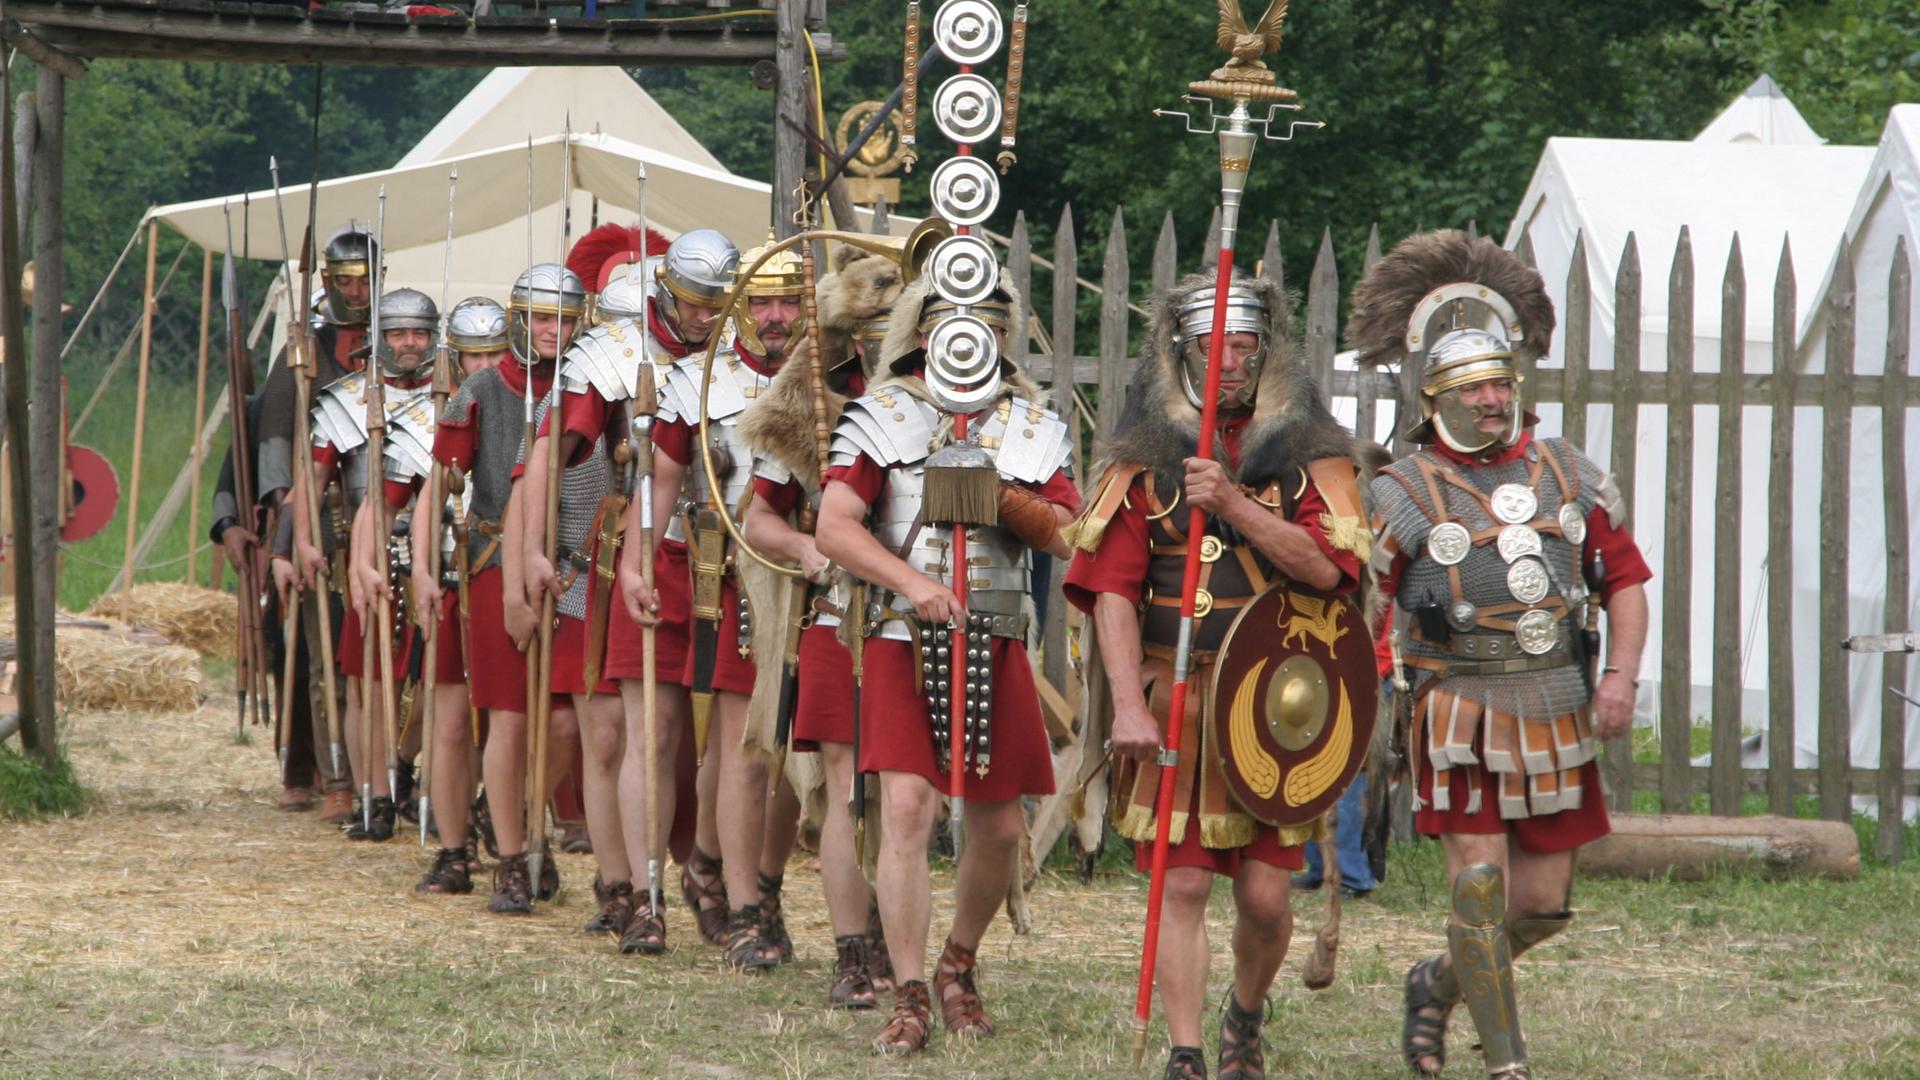 Re-enactors portraying Roman soldiers of the first century.